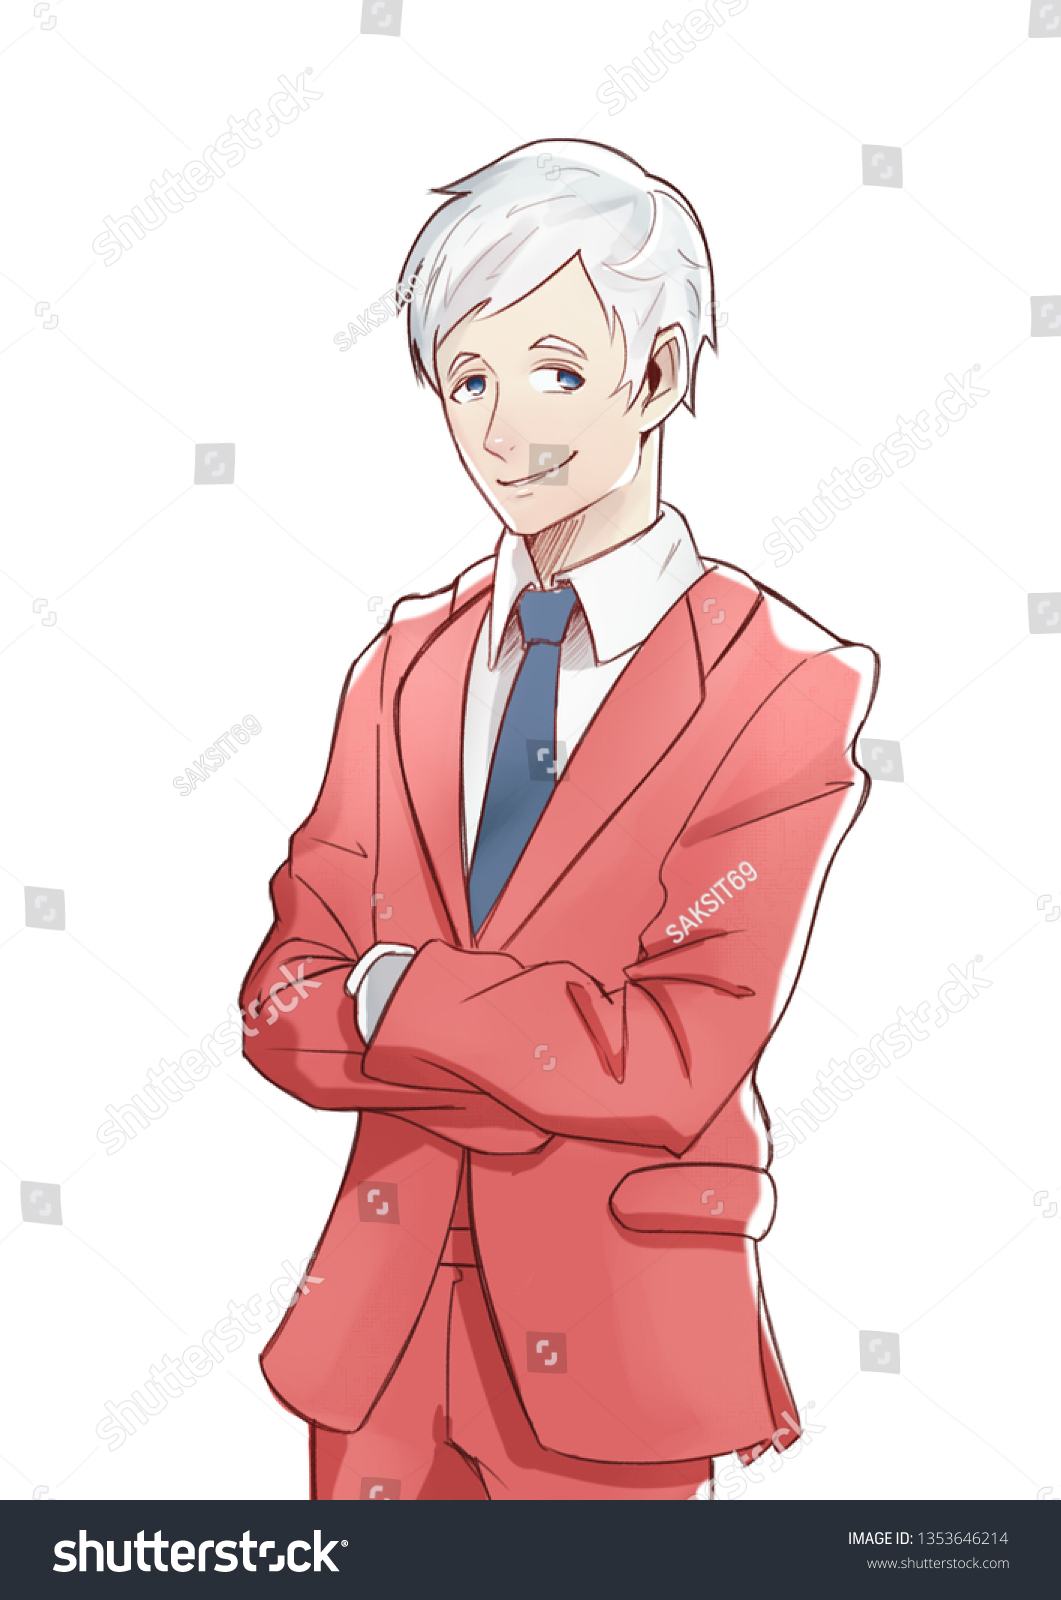 Anime Boy Suit : Anime Boy Anime Suit Suit Drawing Drawing Clothes : We hope you enjoy our ...